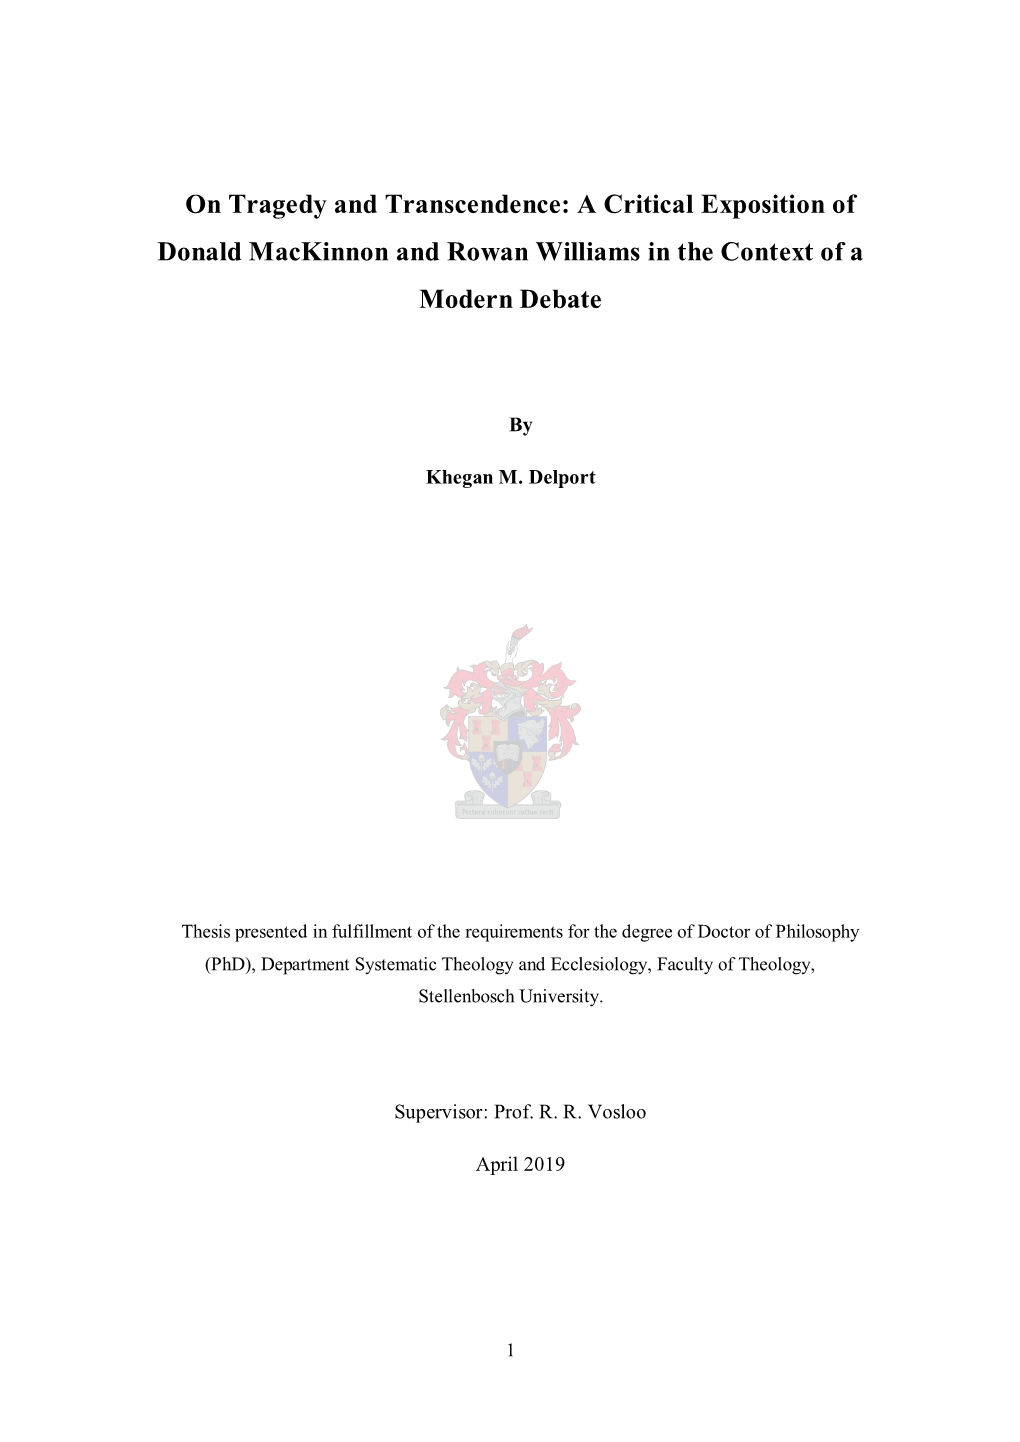 A Critical Exposition of Donald Mackinnon and Rowan Williams in the Context of a Modern Debate